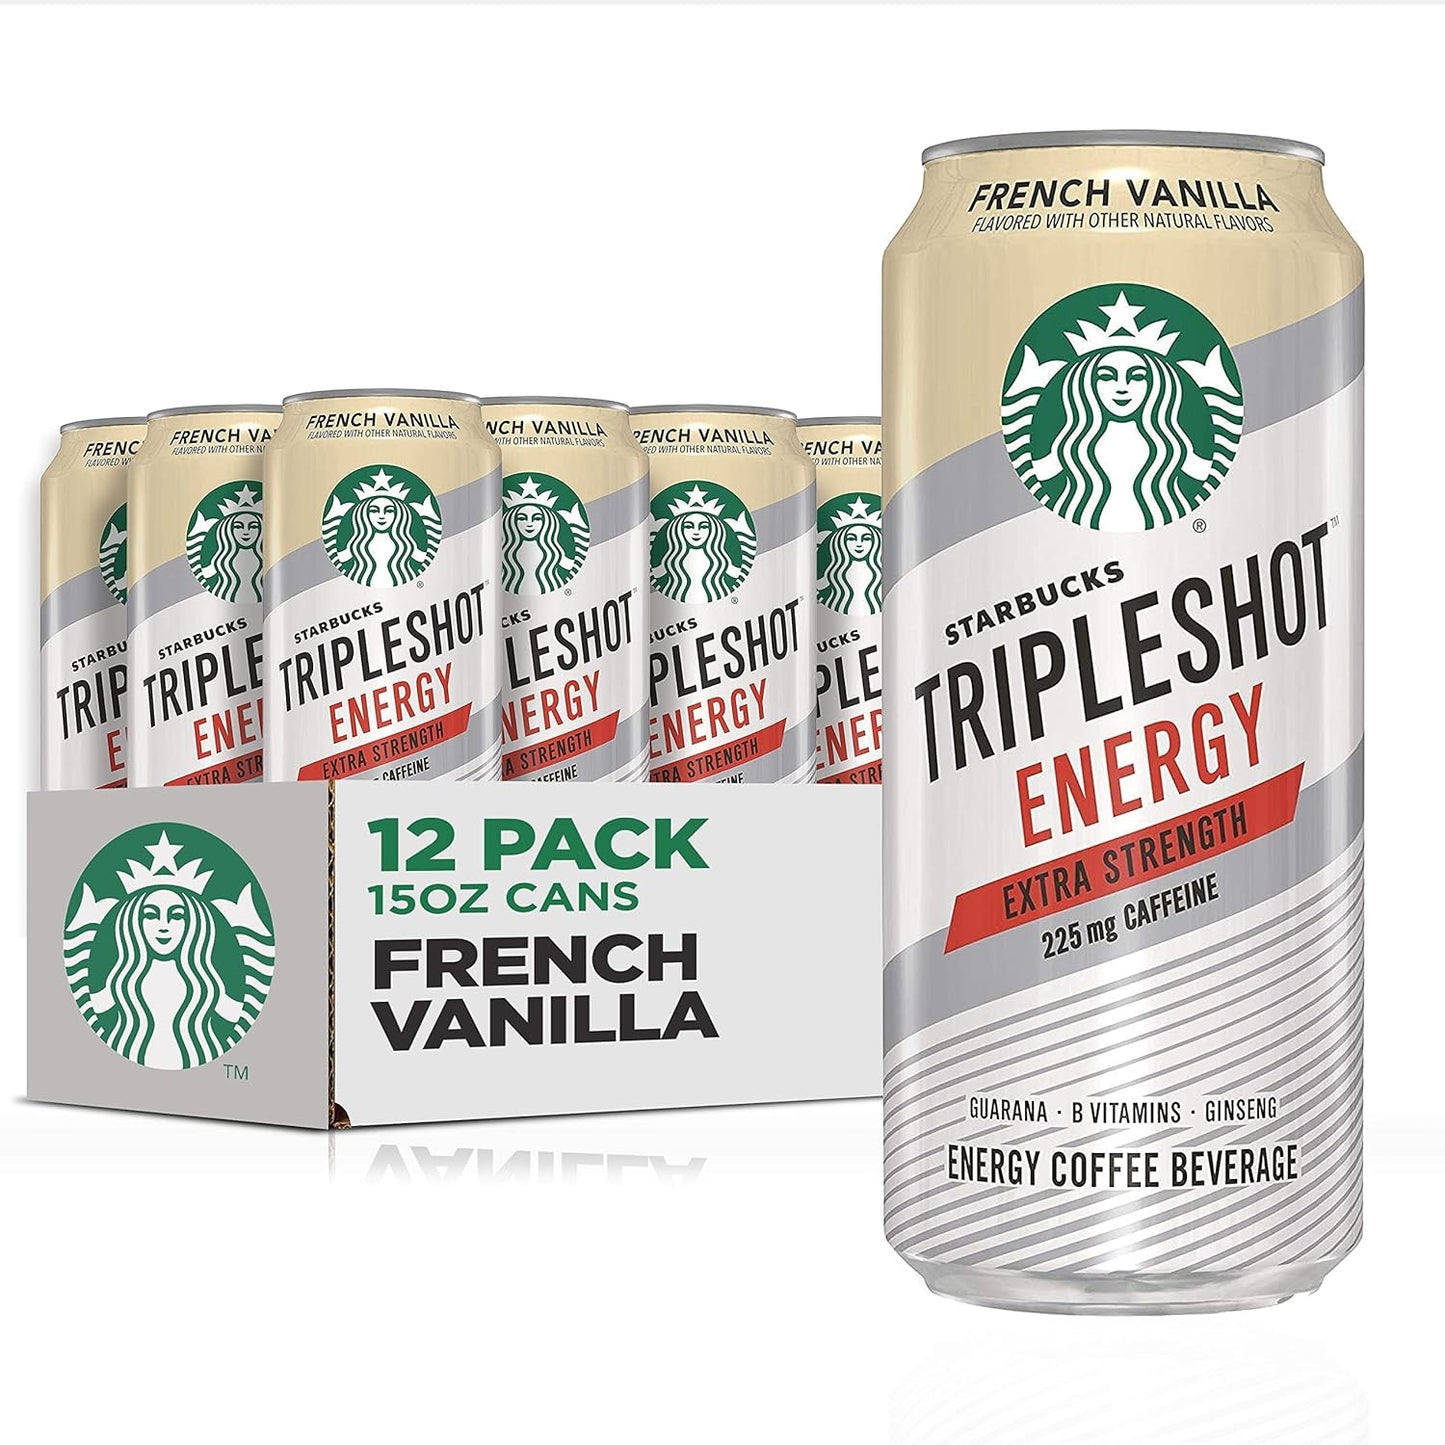 Tripleshot Energy Extra Strength Espresso Coffee Beverage, French Vanilla, 225Mg Caffeine, 15 Oz Cans (12 Pack)